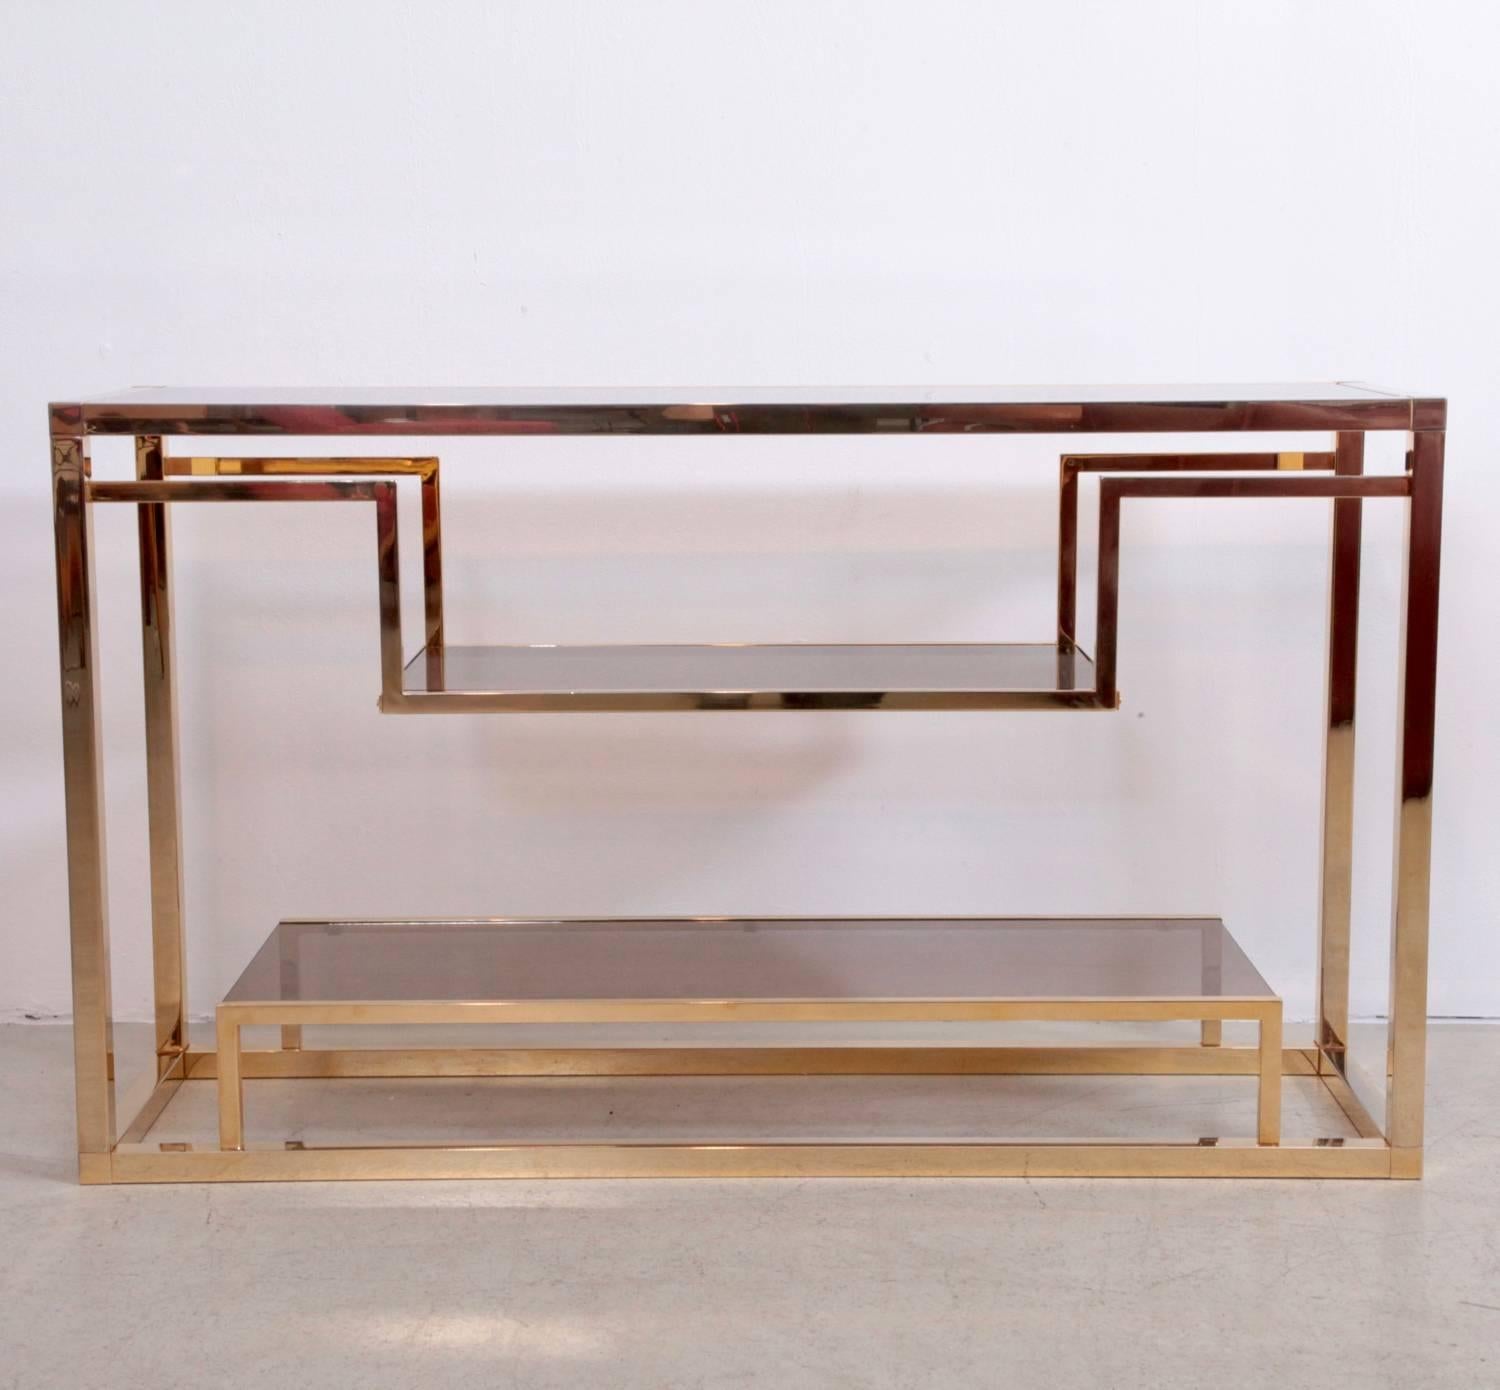 Monumental brass and smoked glass shelf by Romeo Rega. The shelf is in excellent condition.